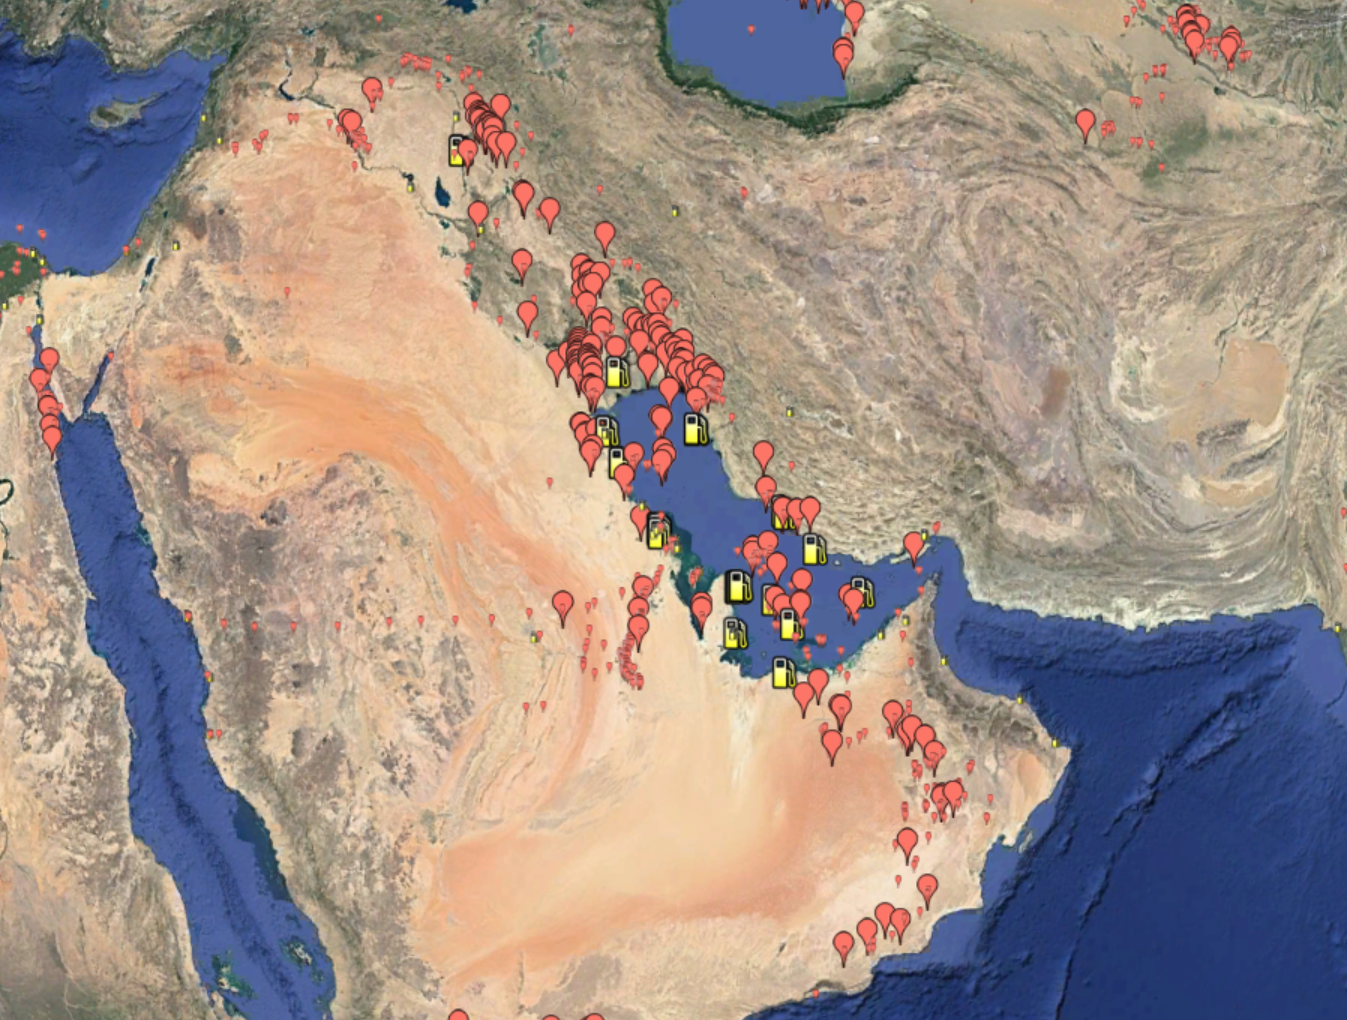  Representation of gas flares recorded over the Persian Gulf in 2019 by Earth Observation Group's Global Gas Flare Survey.